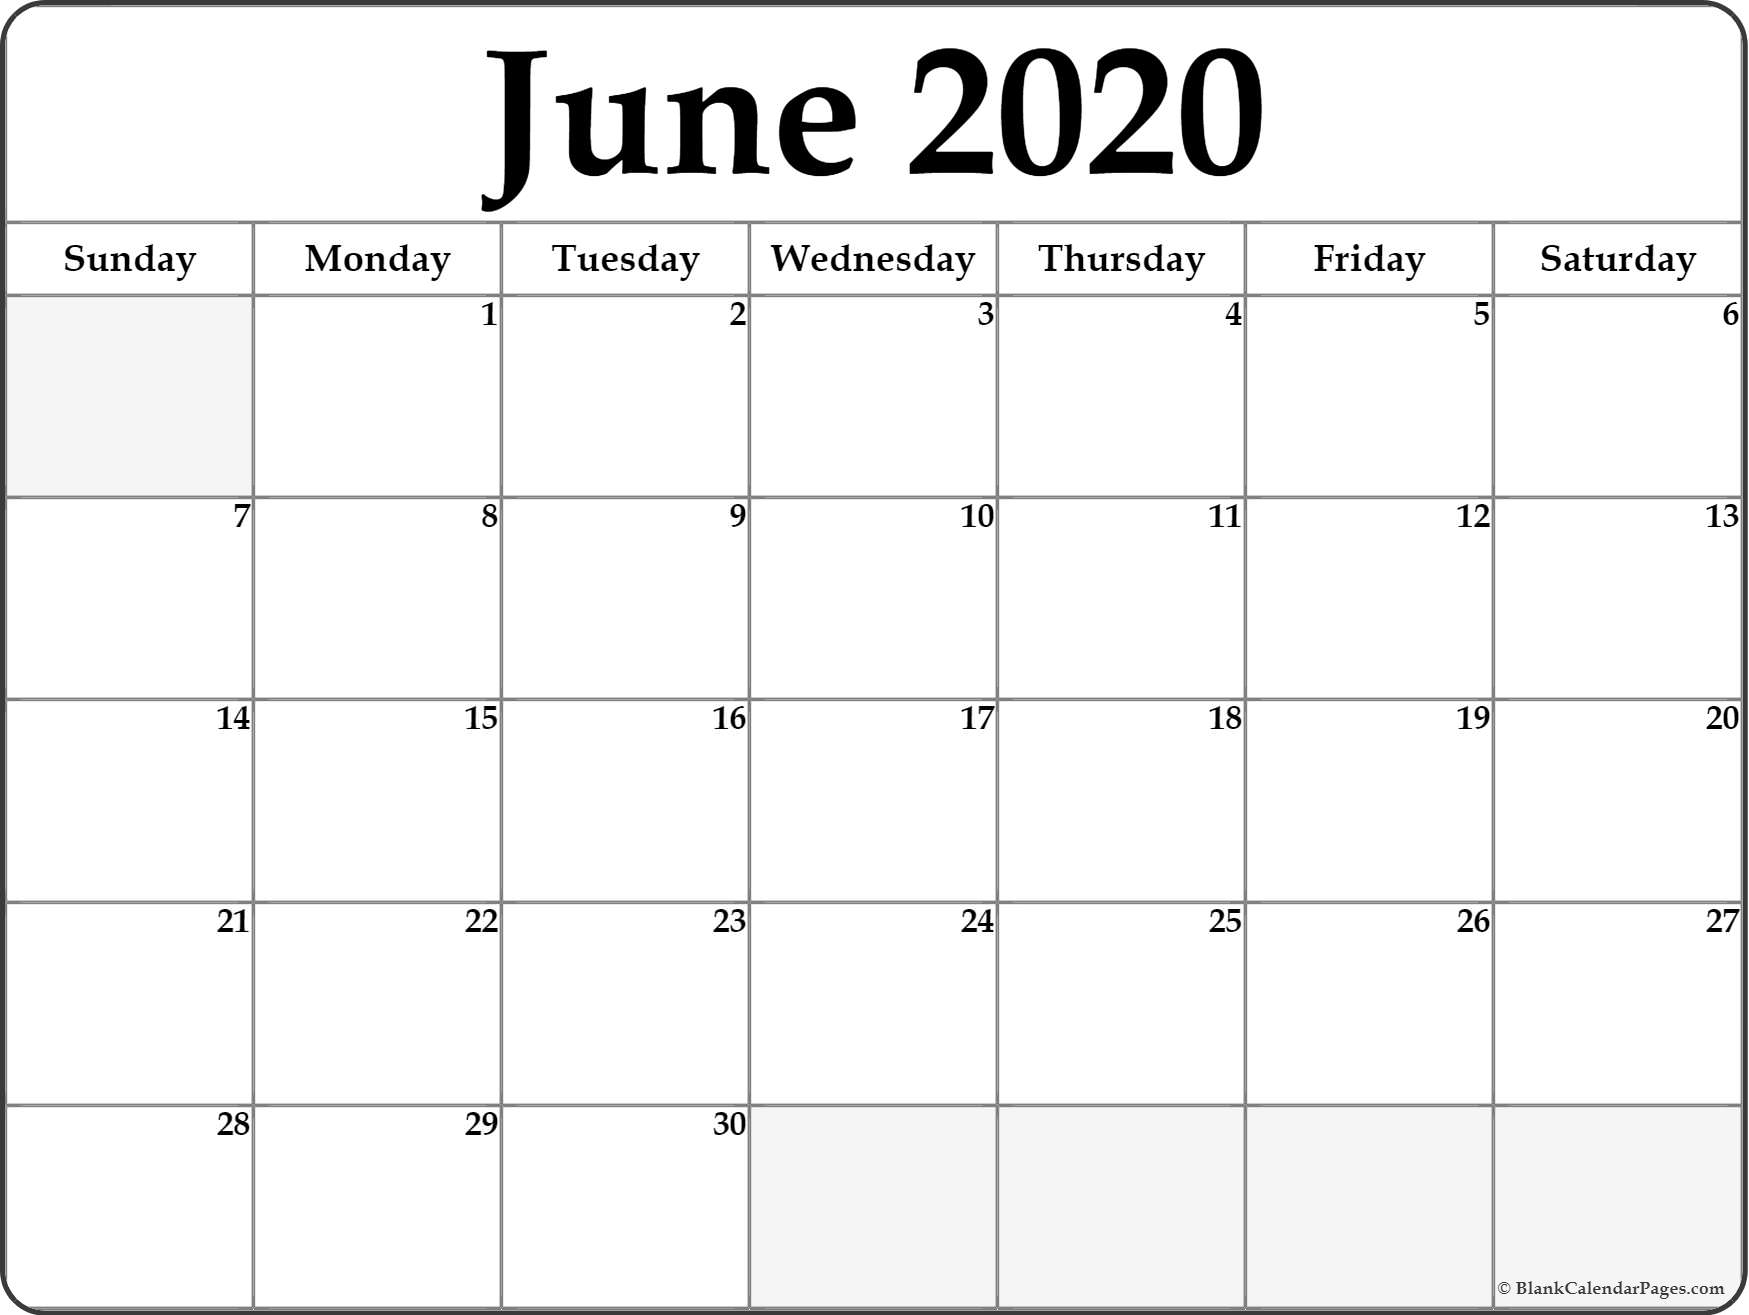 June 2020 Calendar | Free Printable Monthly Calendars throughout 2020 Calender With Space To Write